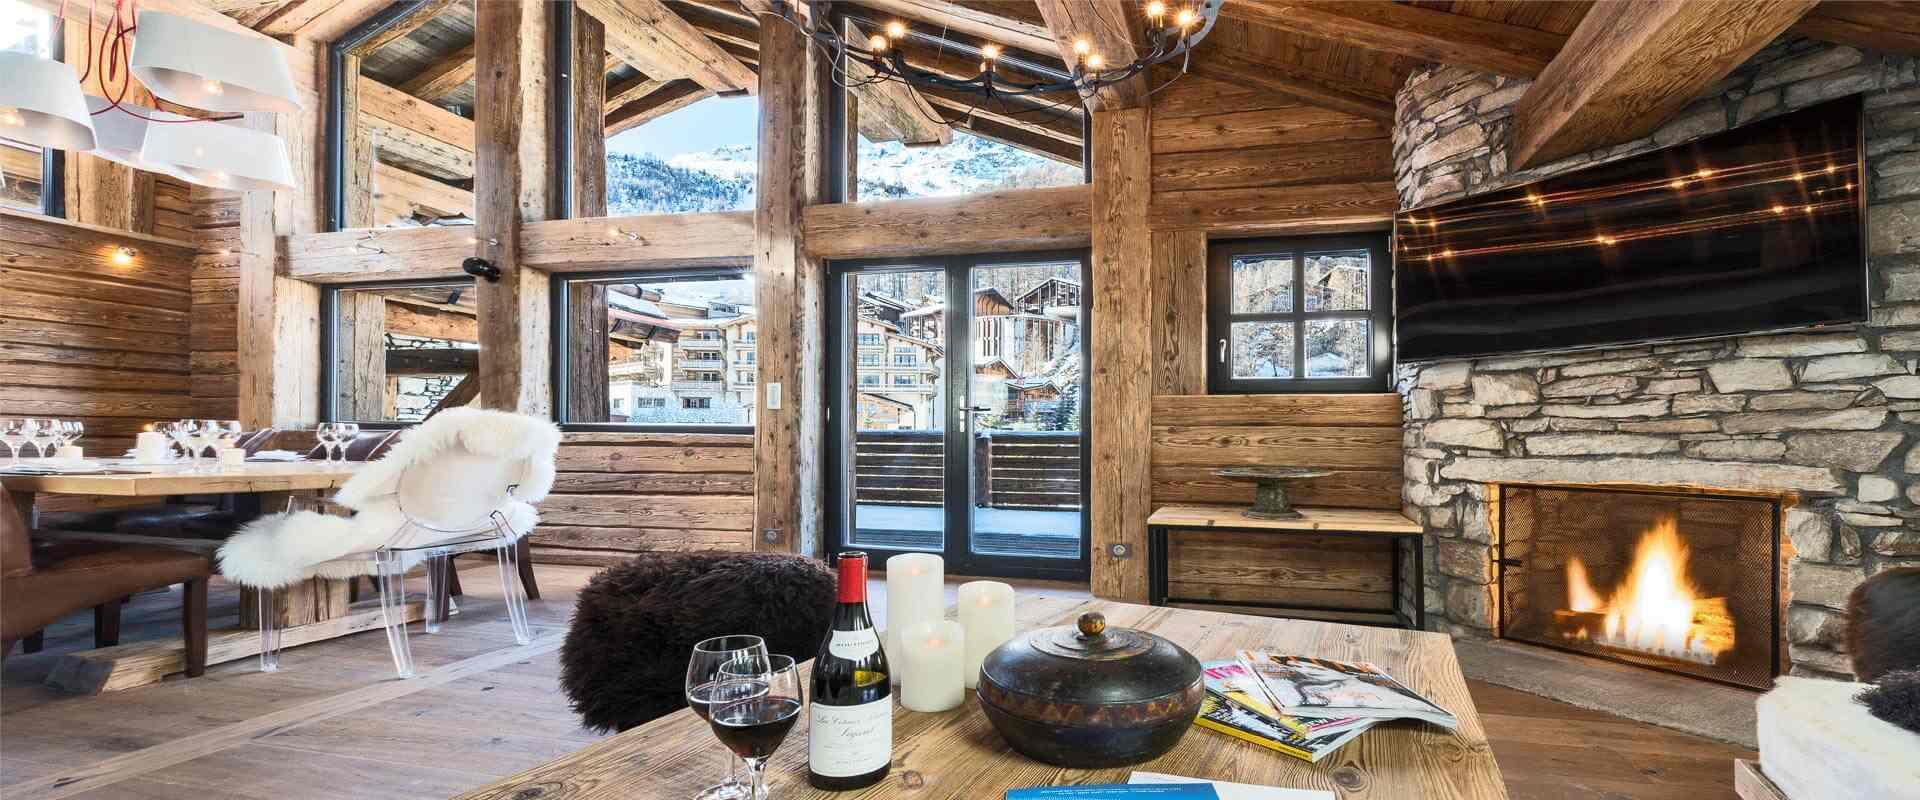 location chalet alpes val d’isere